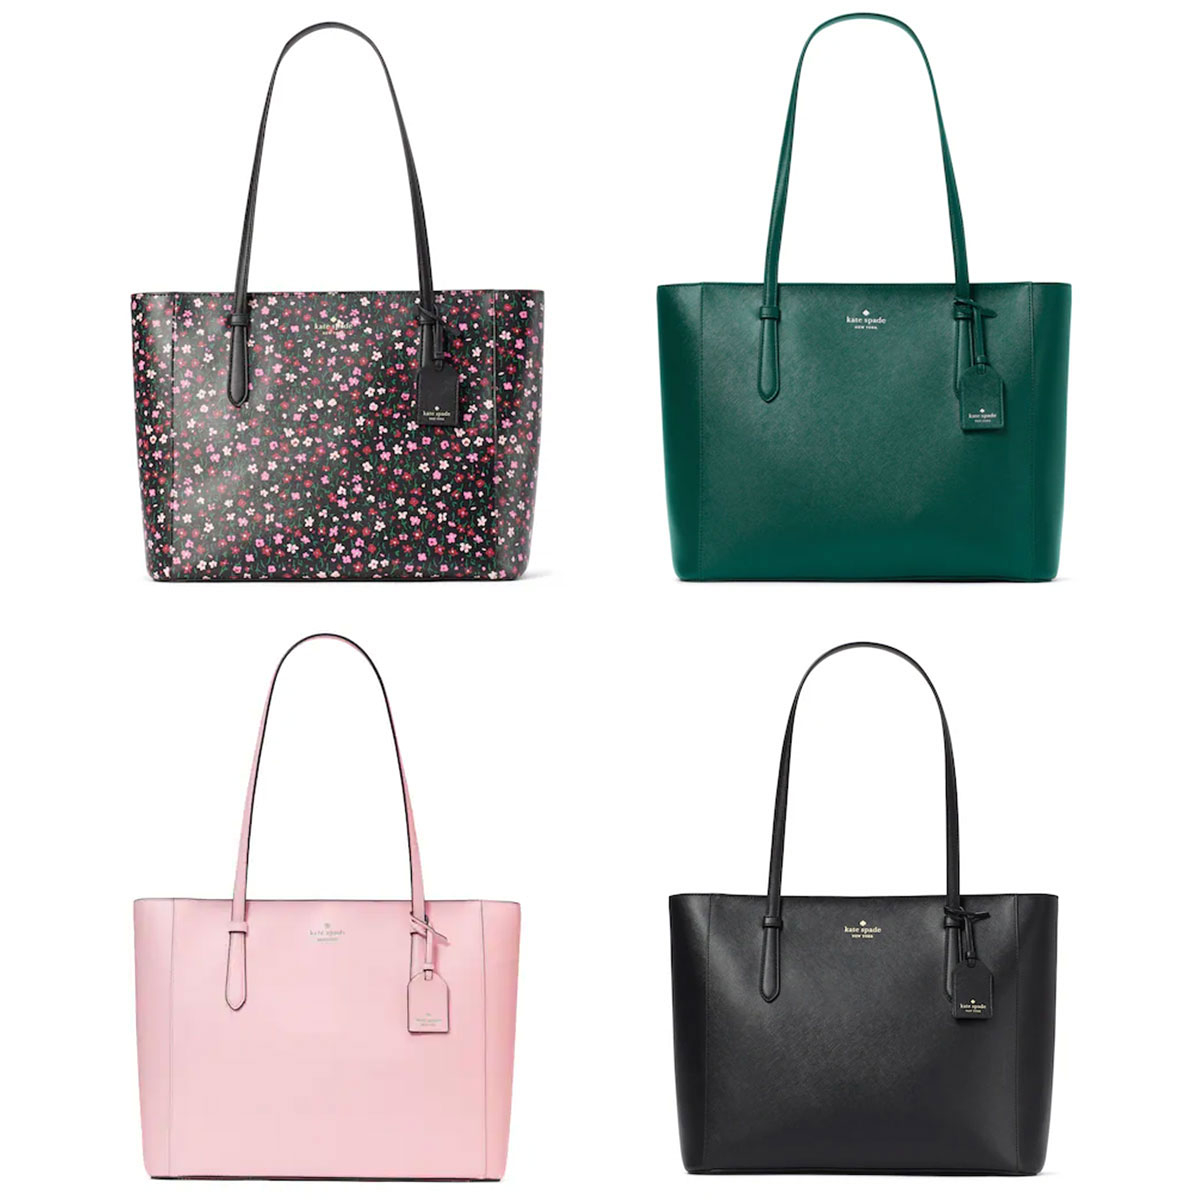 Kate Spade 24-Hour Flash Deal: Get This $360 Satchel Bag for Just $89